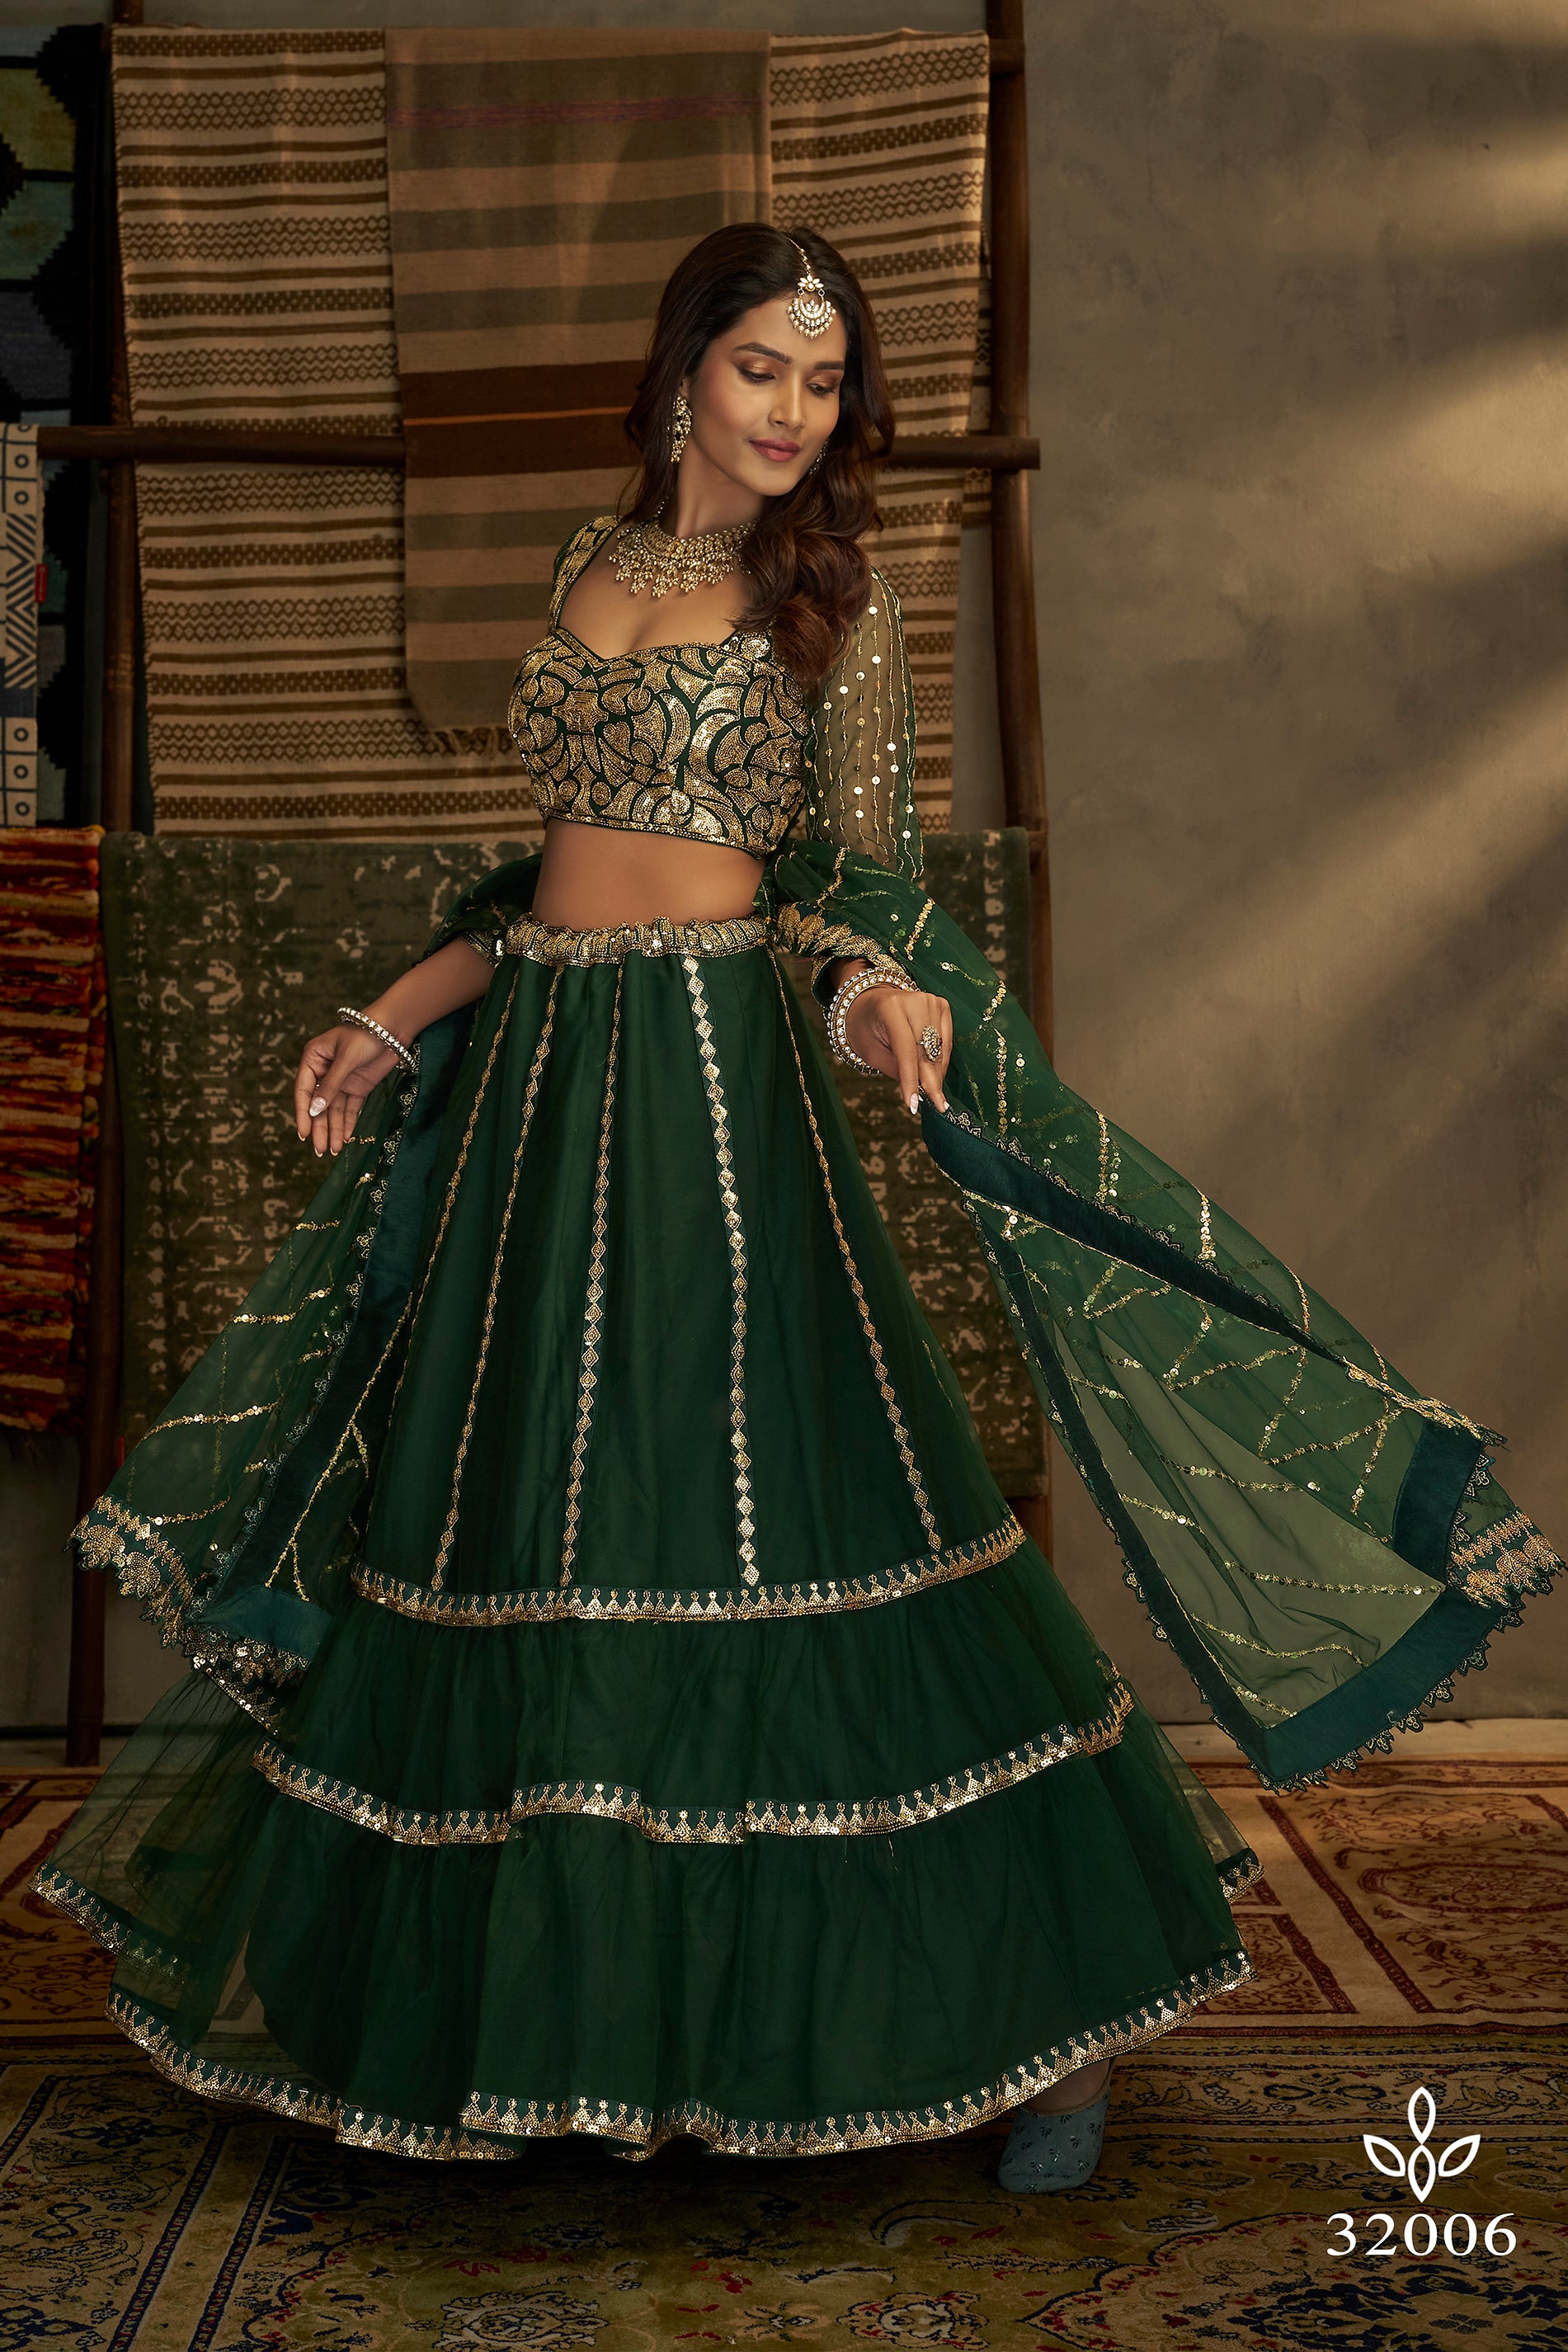 KISH MISH - YATEE : Double layered teal gherdar skirt intricately  embroidered with net flowers and paired with a dabka and resham jaal work  blouse adds an old world charm to the